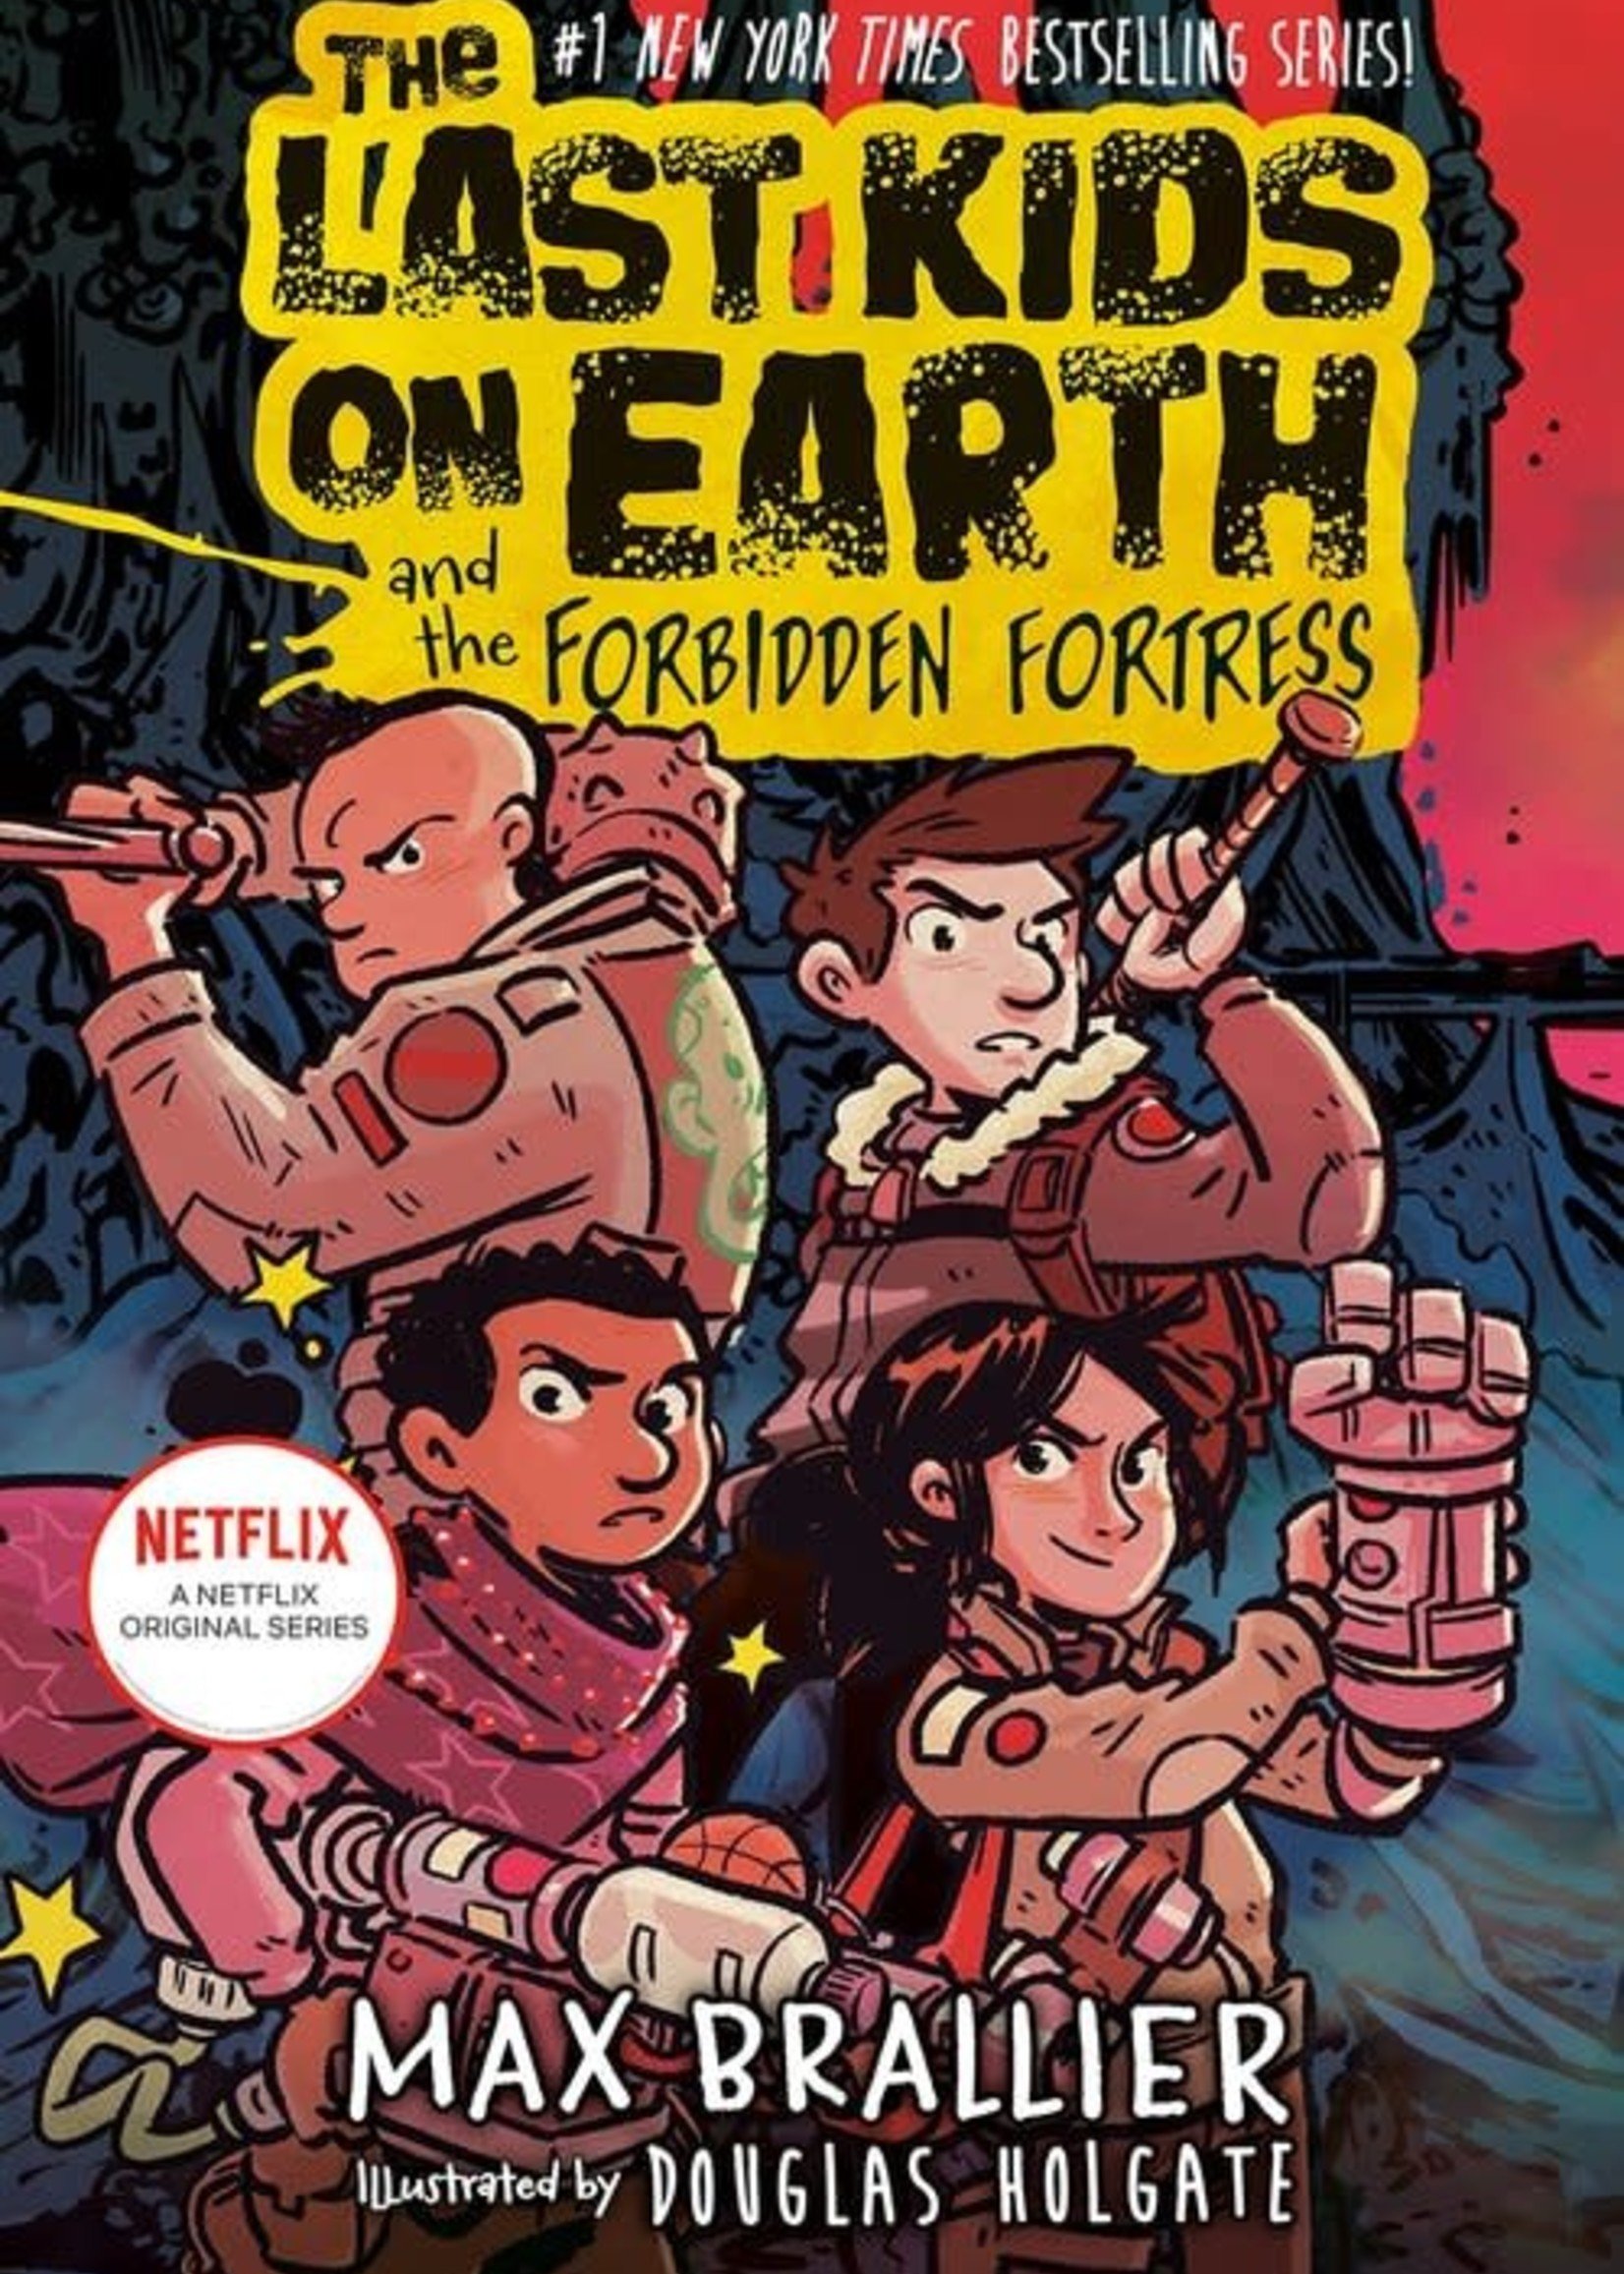 The Last Kids on Earth 8 Forbidden Fortress, Book 8